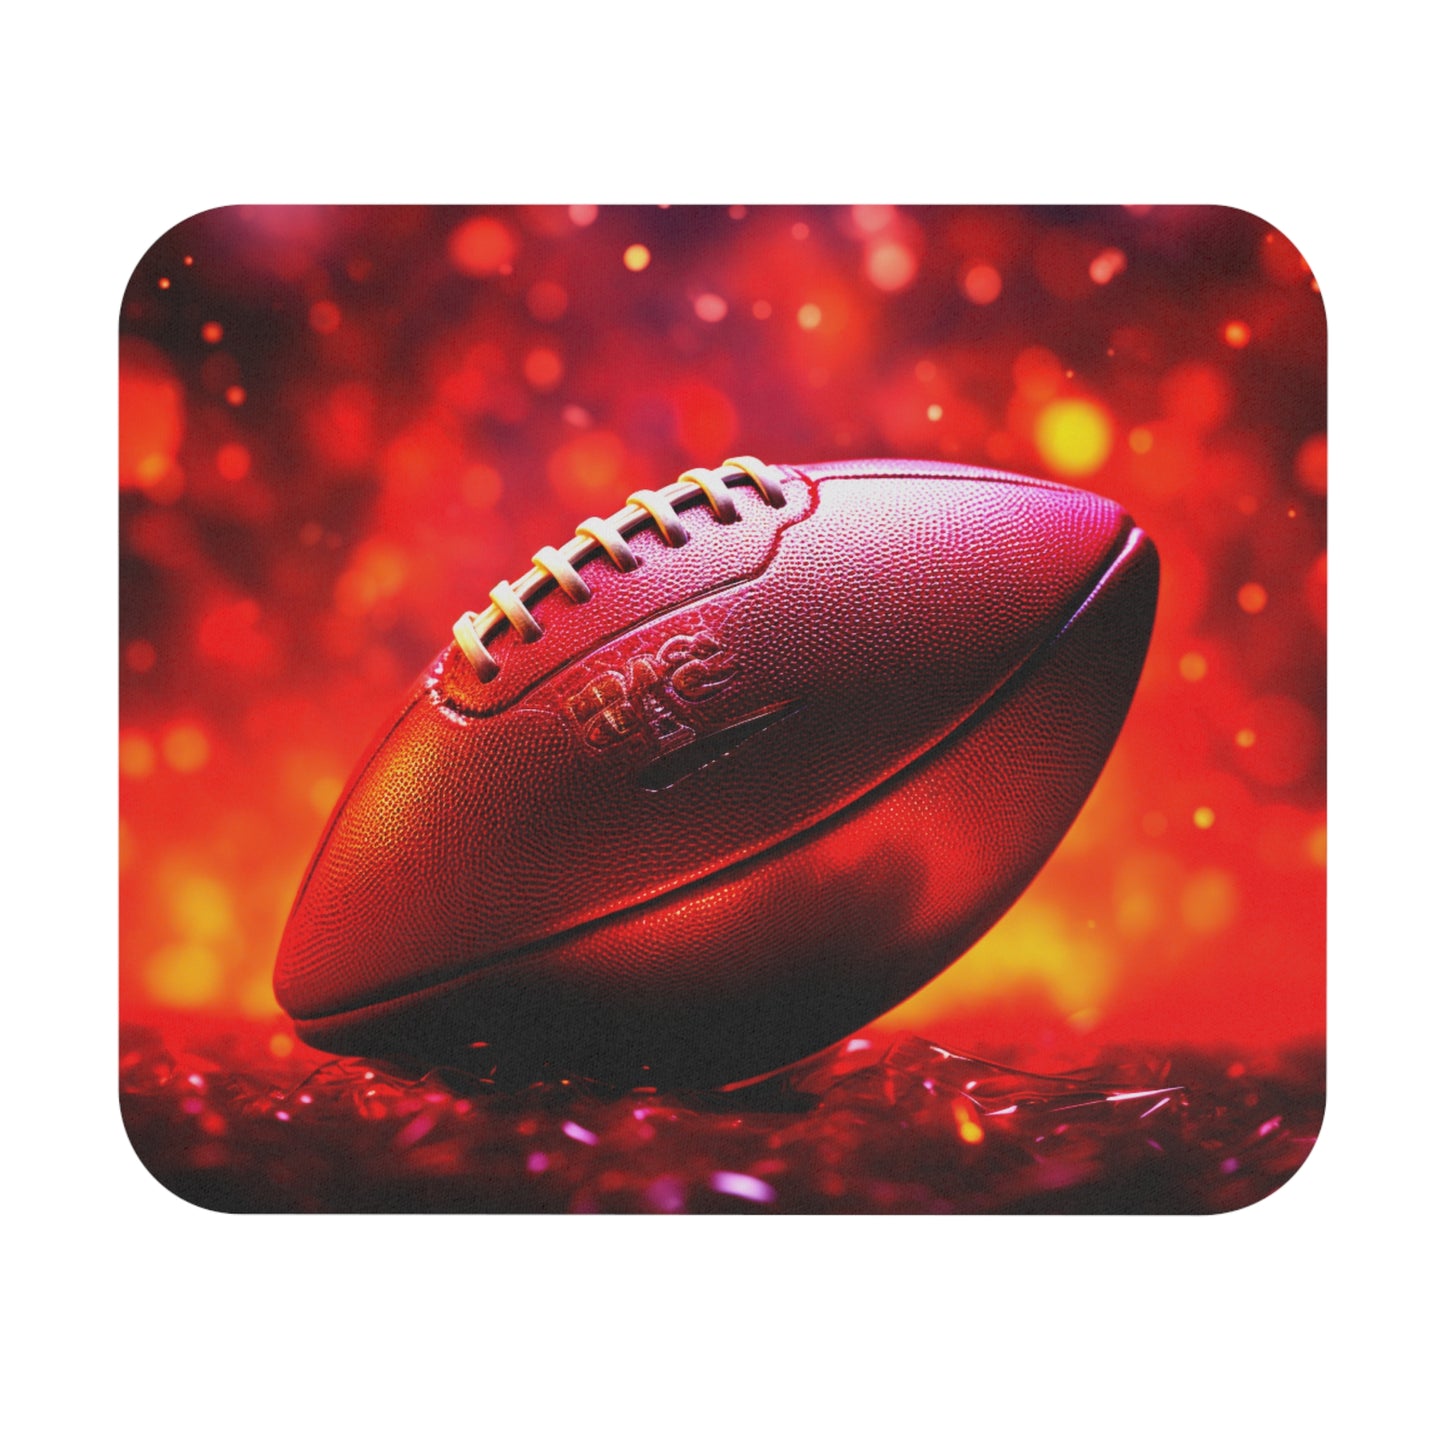 Football Glow Mouse Pad From Big Fairy Tales By Schatar